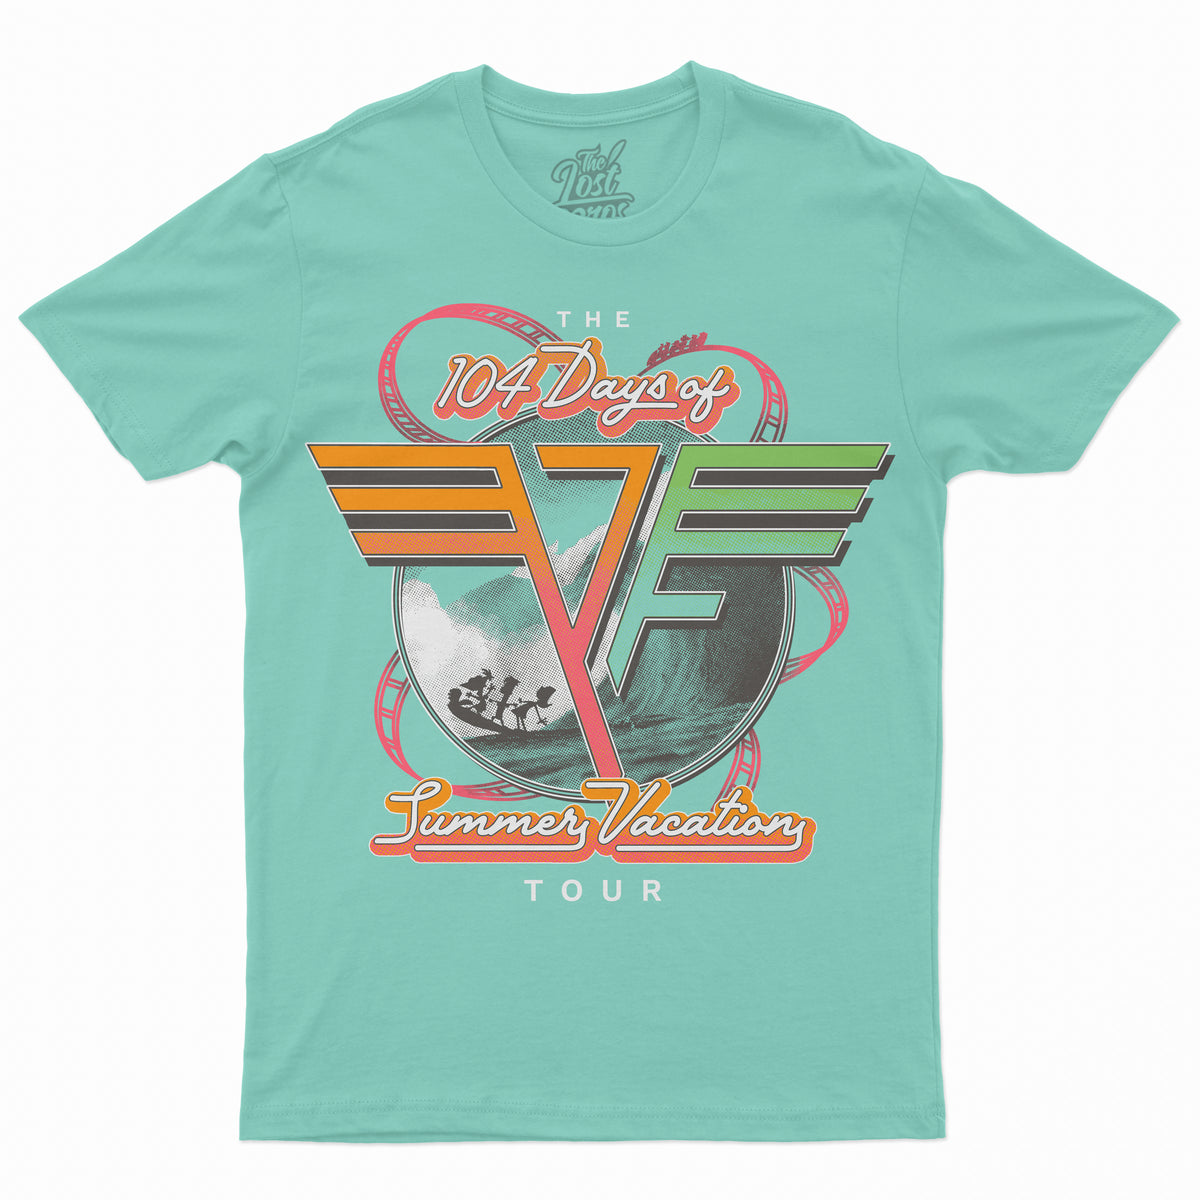 104 Days of Summer Vacation Tour Tee